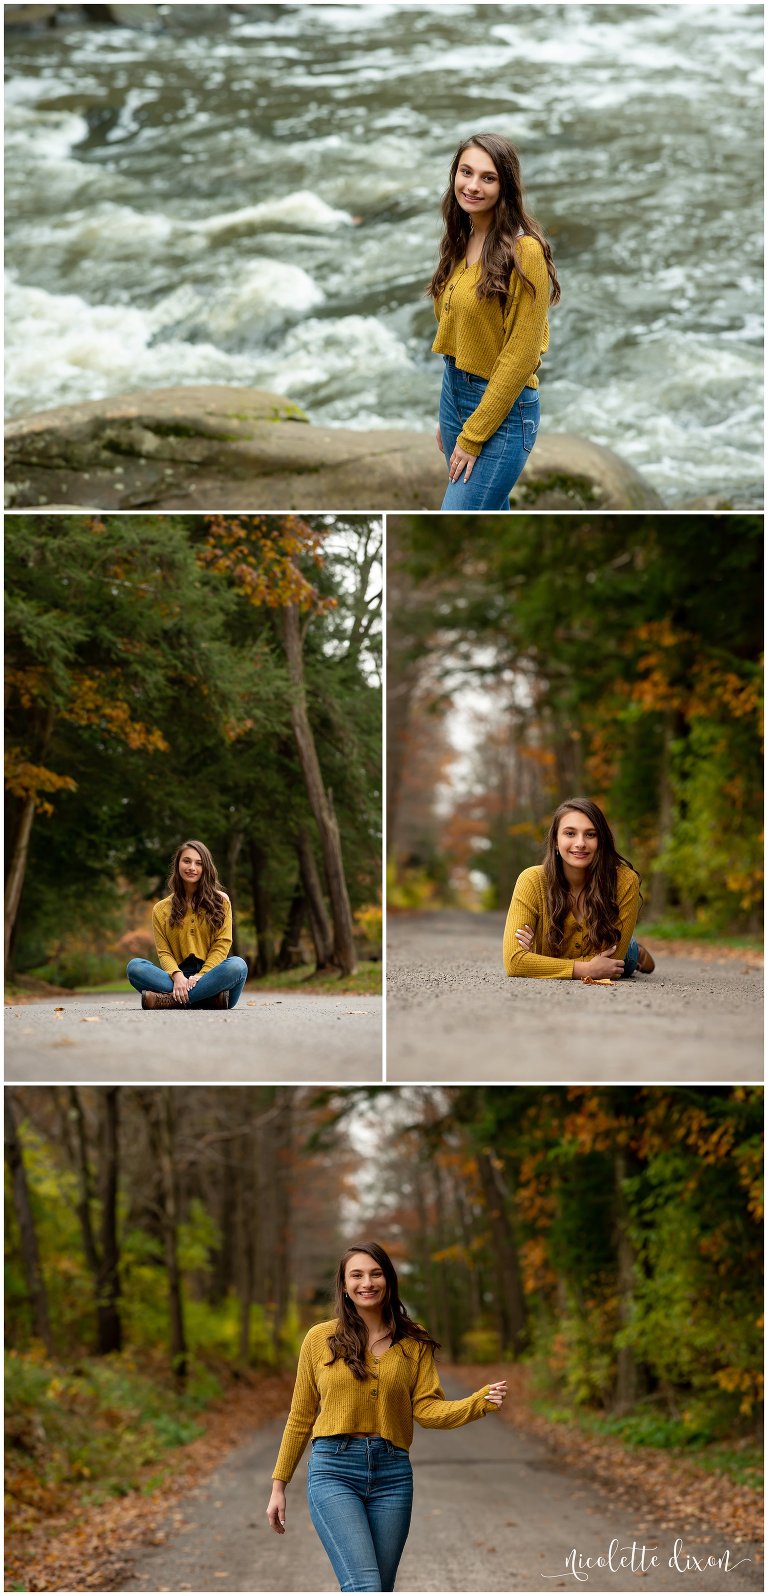 High School Senior Girl on Road with Fall Foliage in the Background in McConnells Mills near Pittsburgh PA